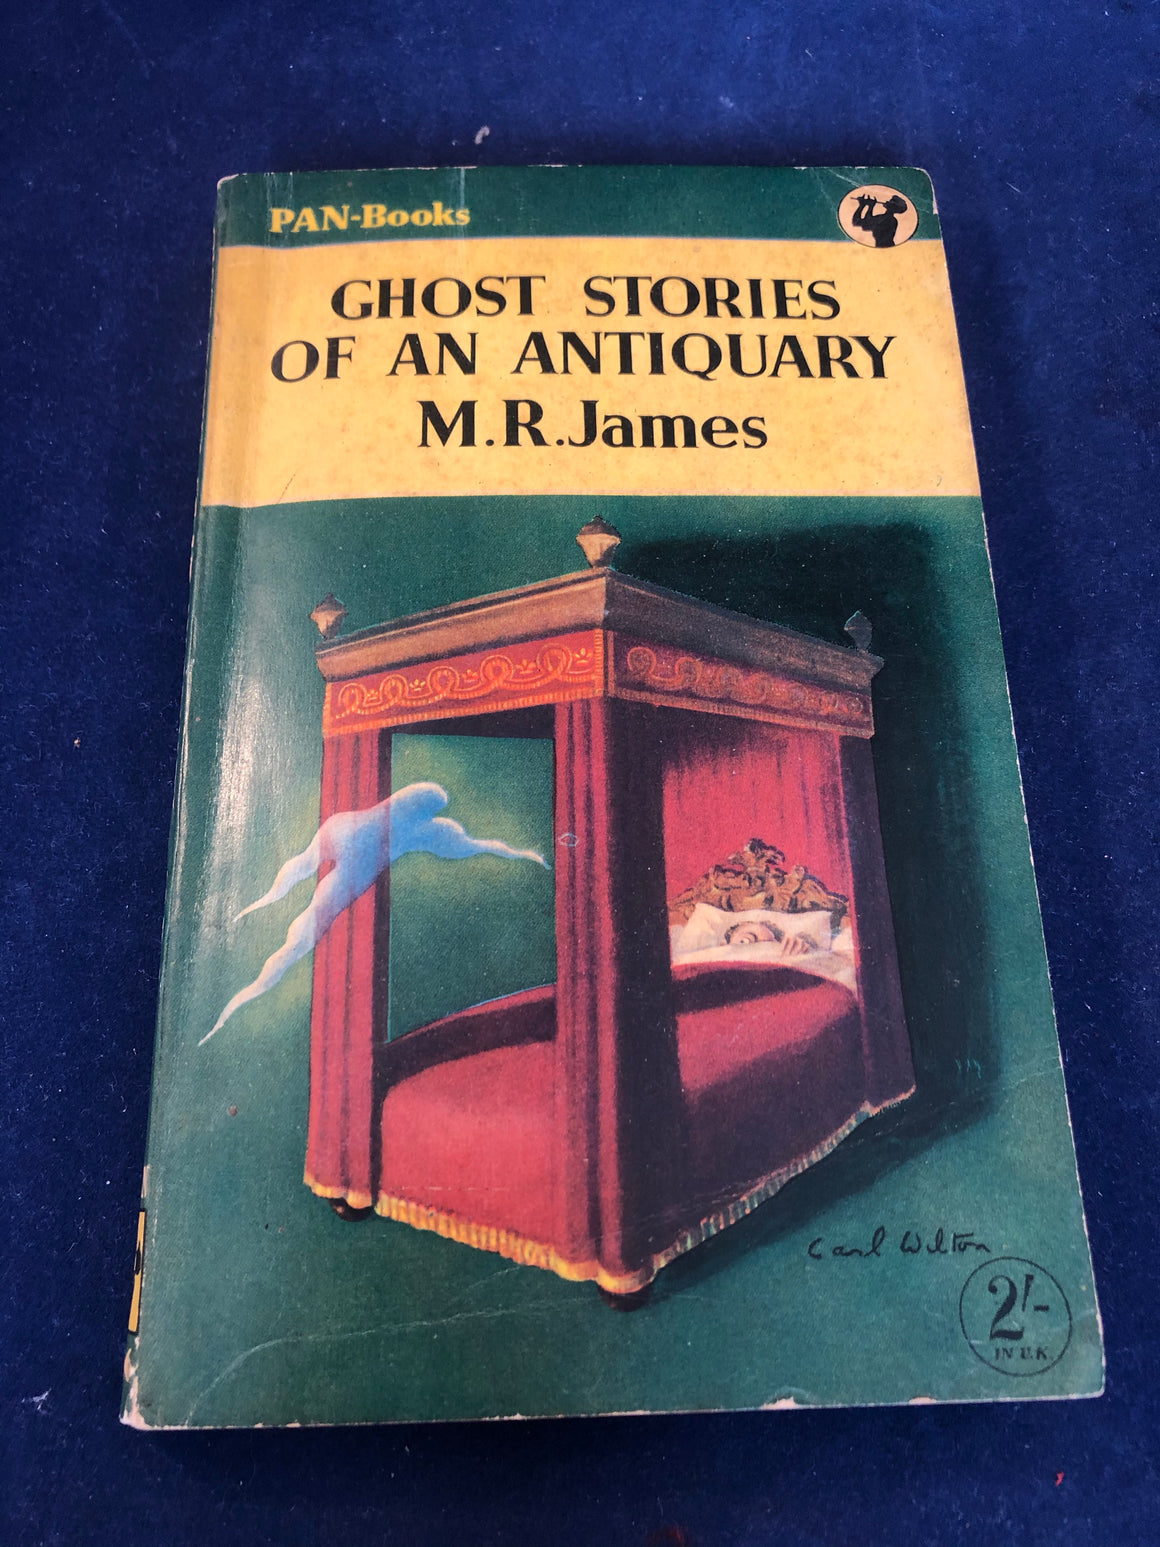 henry james ghost stories collection